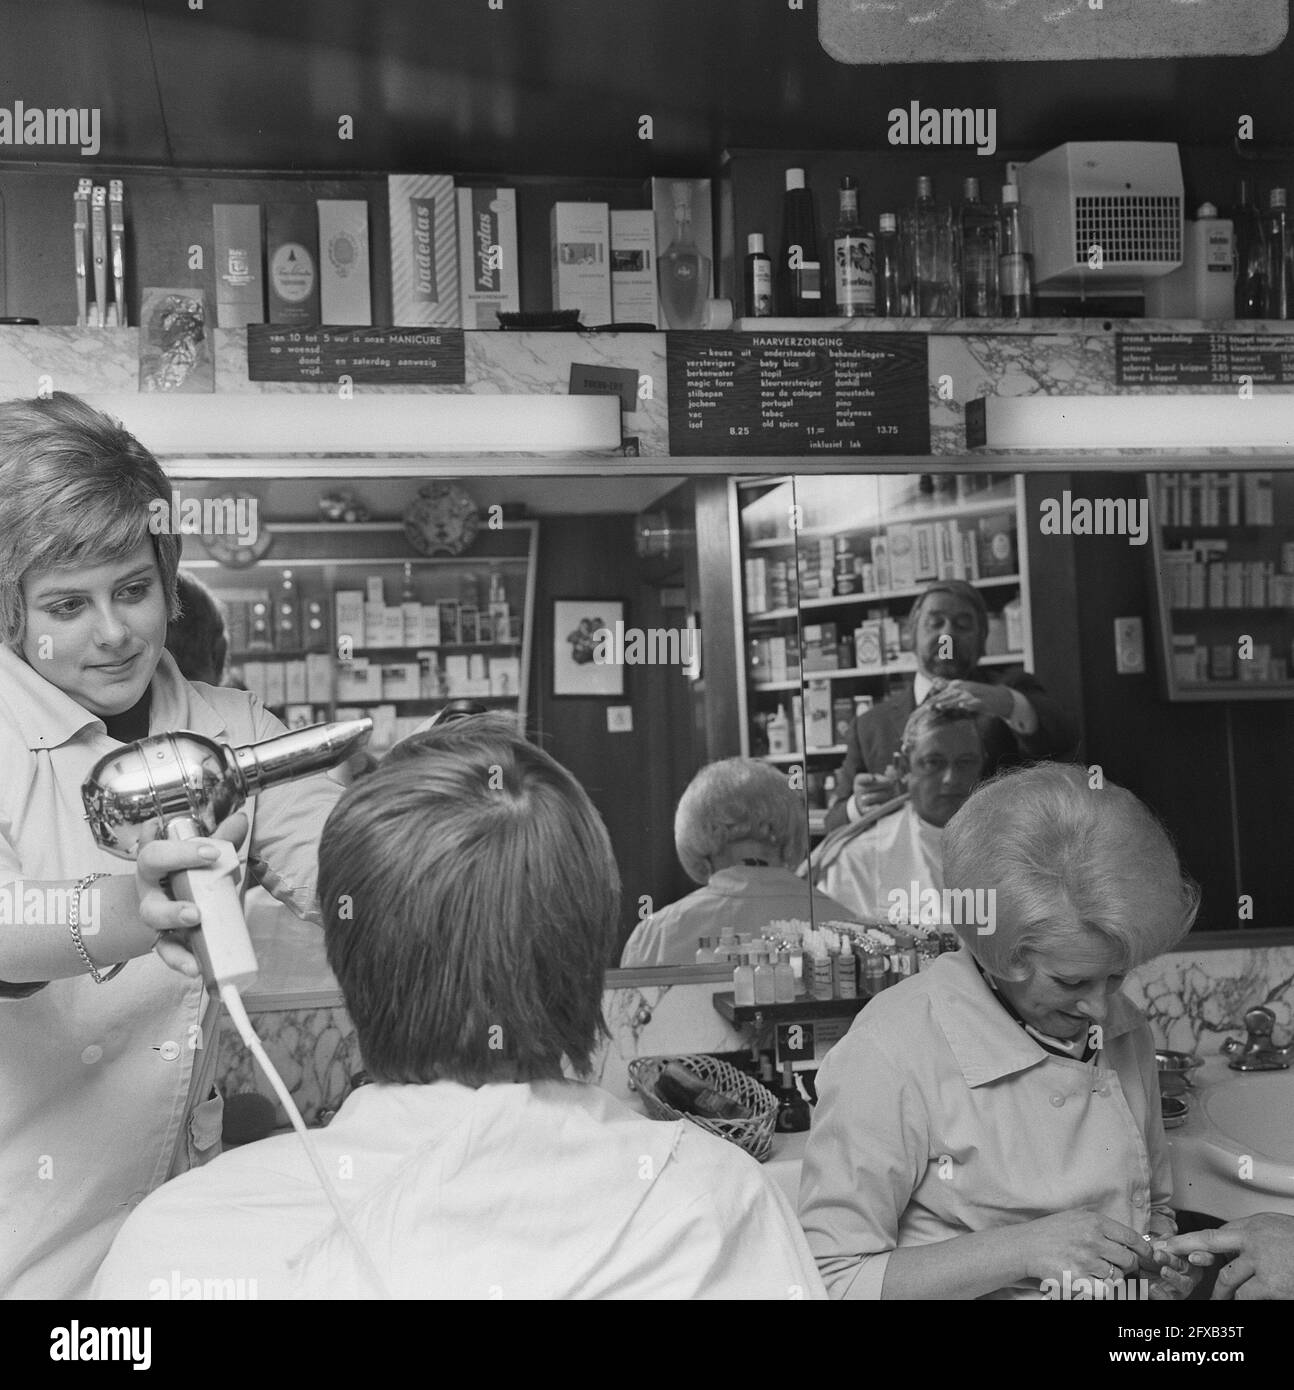 First woman in Amsterdam who acquired the professional diploma in men's hairdressing Jessica Nietvelt. She works in the business of her father Tonny Nietvelt., 4 December 1969, hairdressers, The Netherlands, 20th century press agency photo, news to remember, documentary, historic photography 1945-1990, visual stories, human history of the Twentieth Century, capturing moments in time Stock Photo